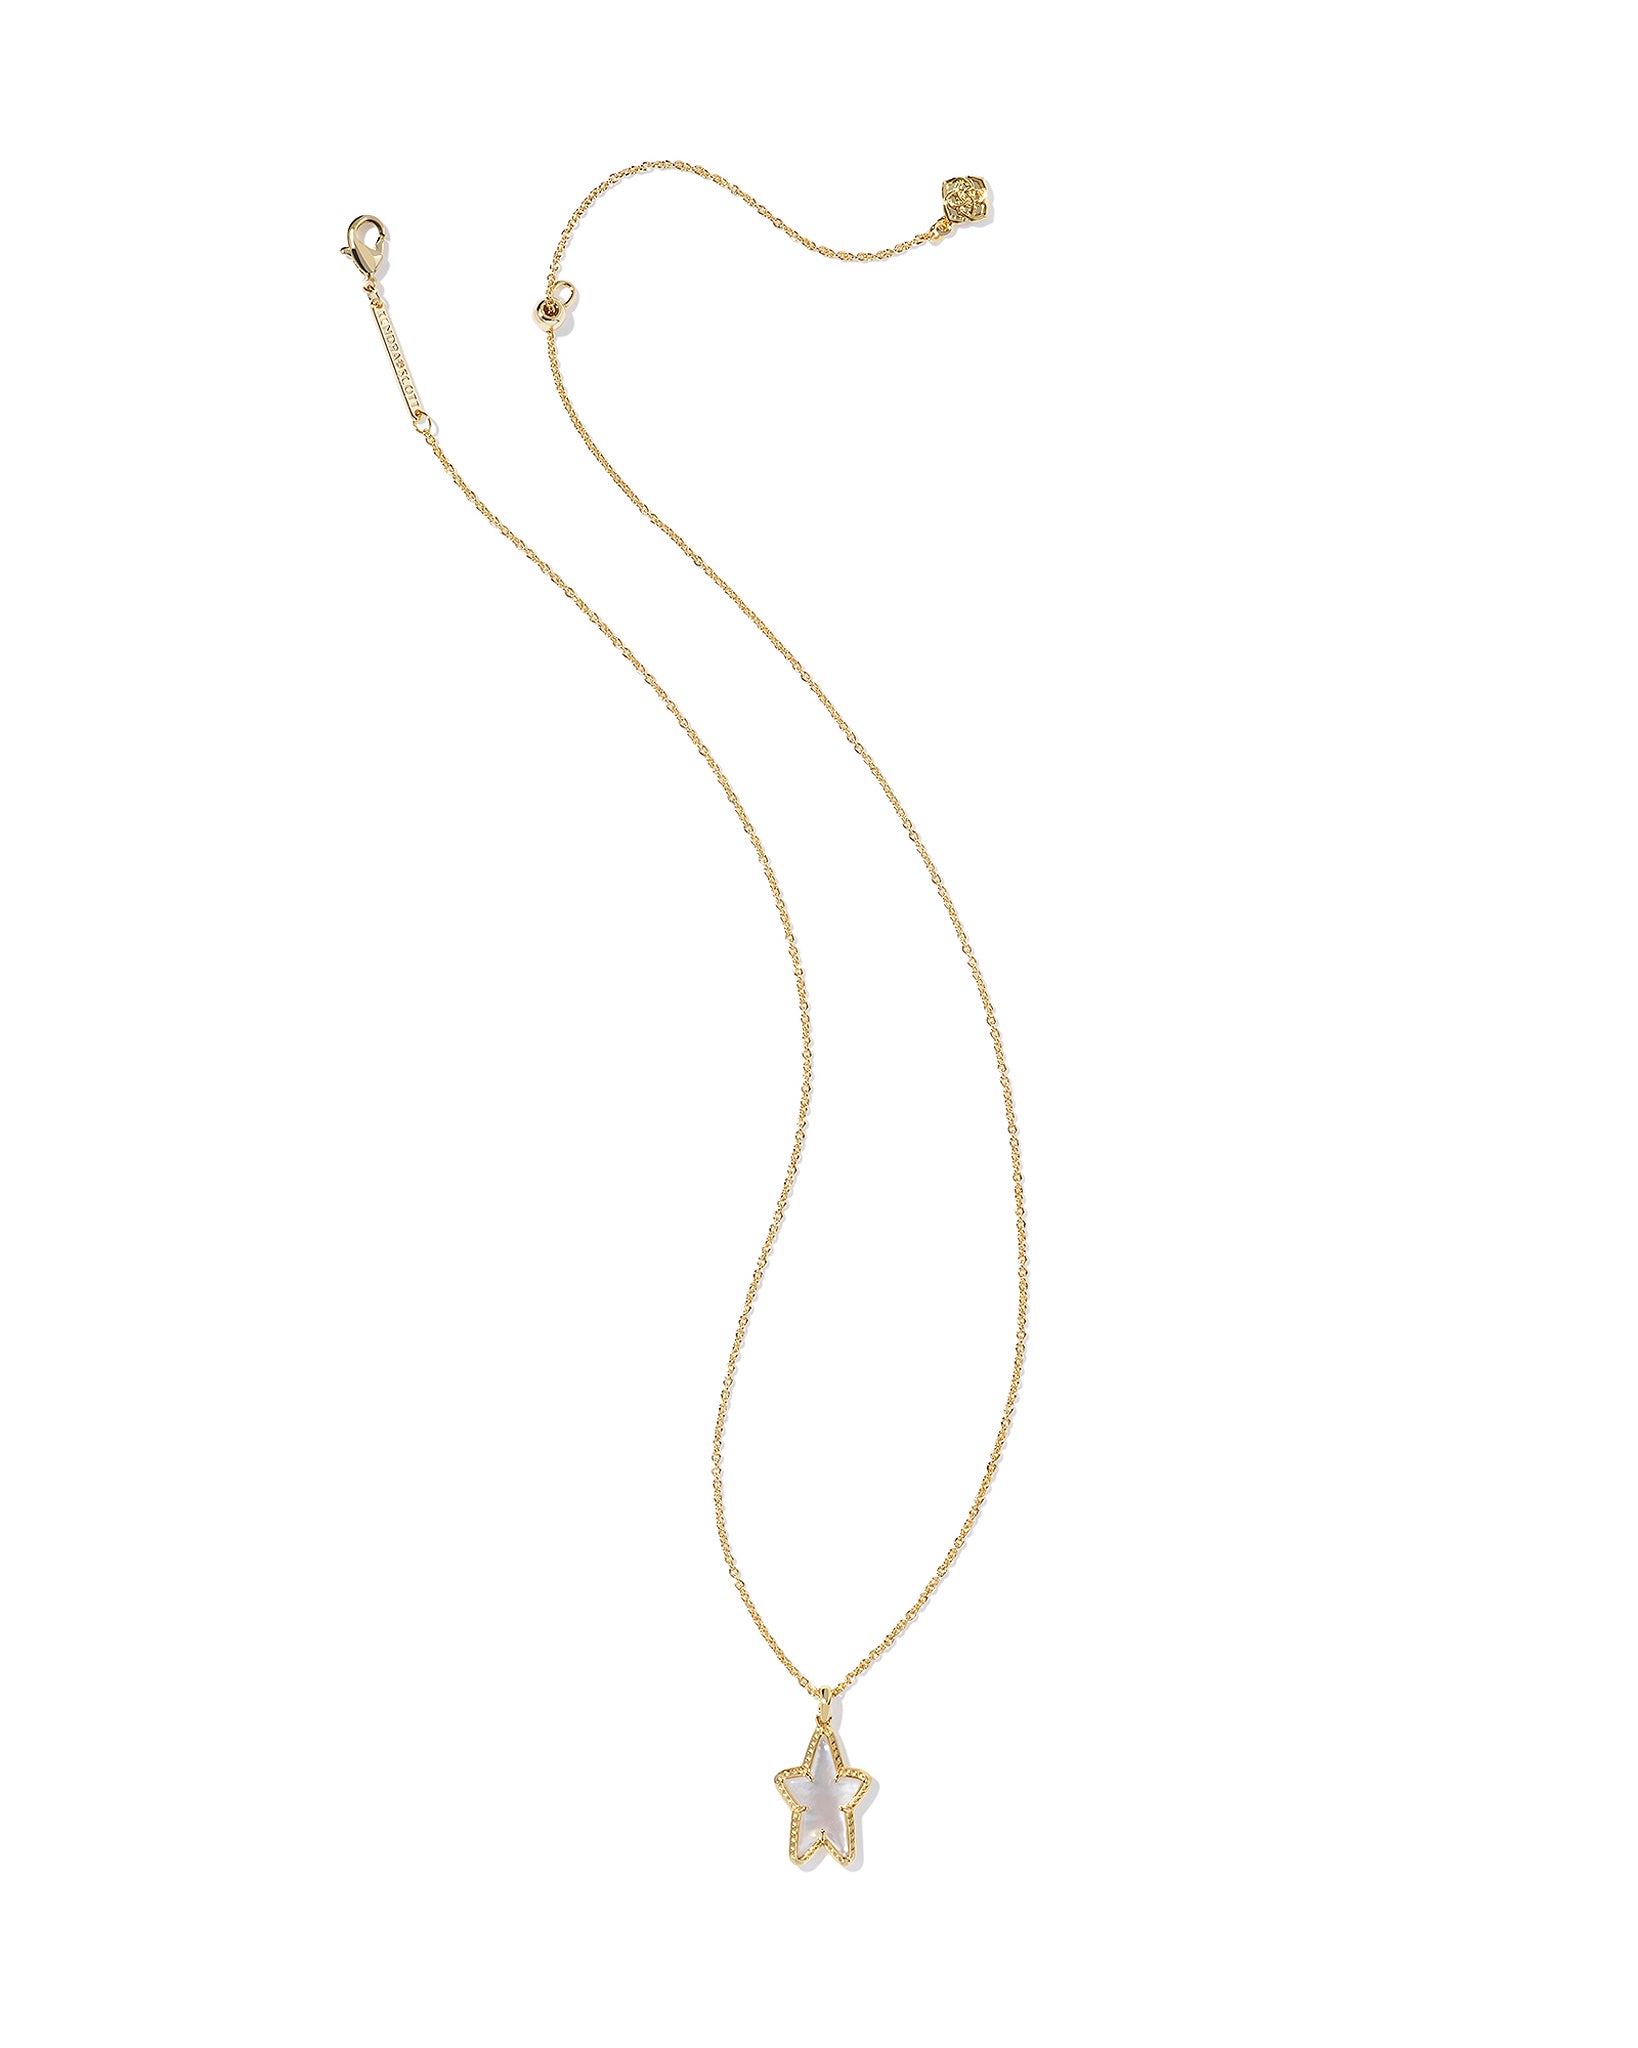 Kendra Scott Ada Short Star Pendant Necklace in Ivory Mother of Pearl and Gold